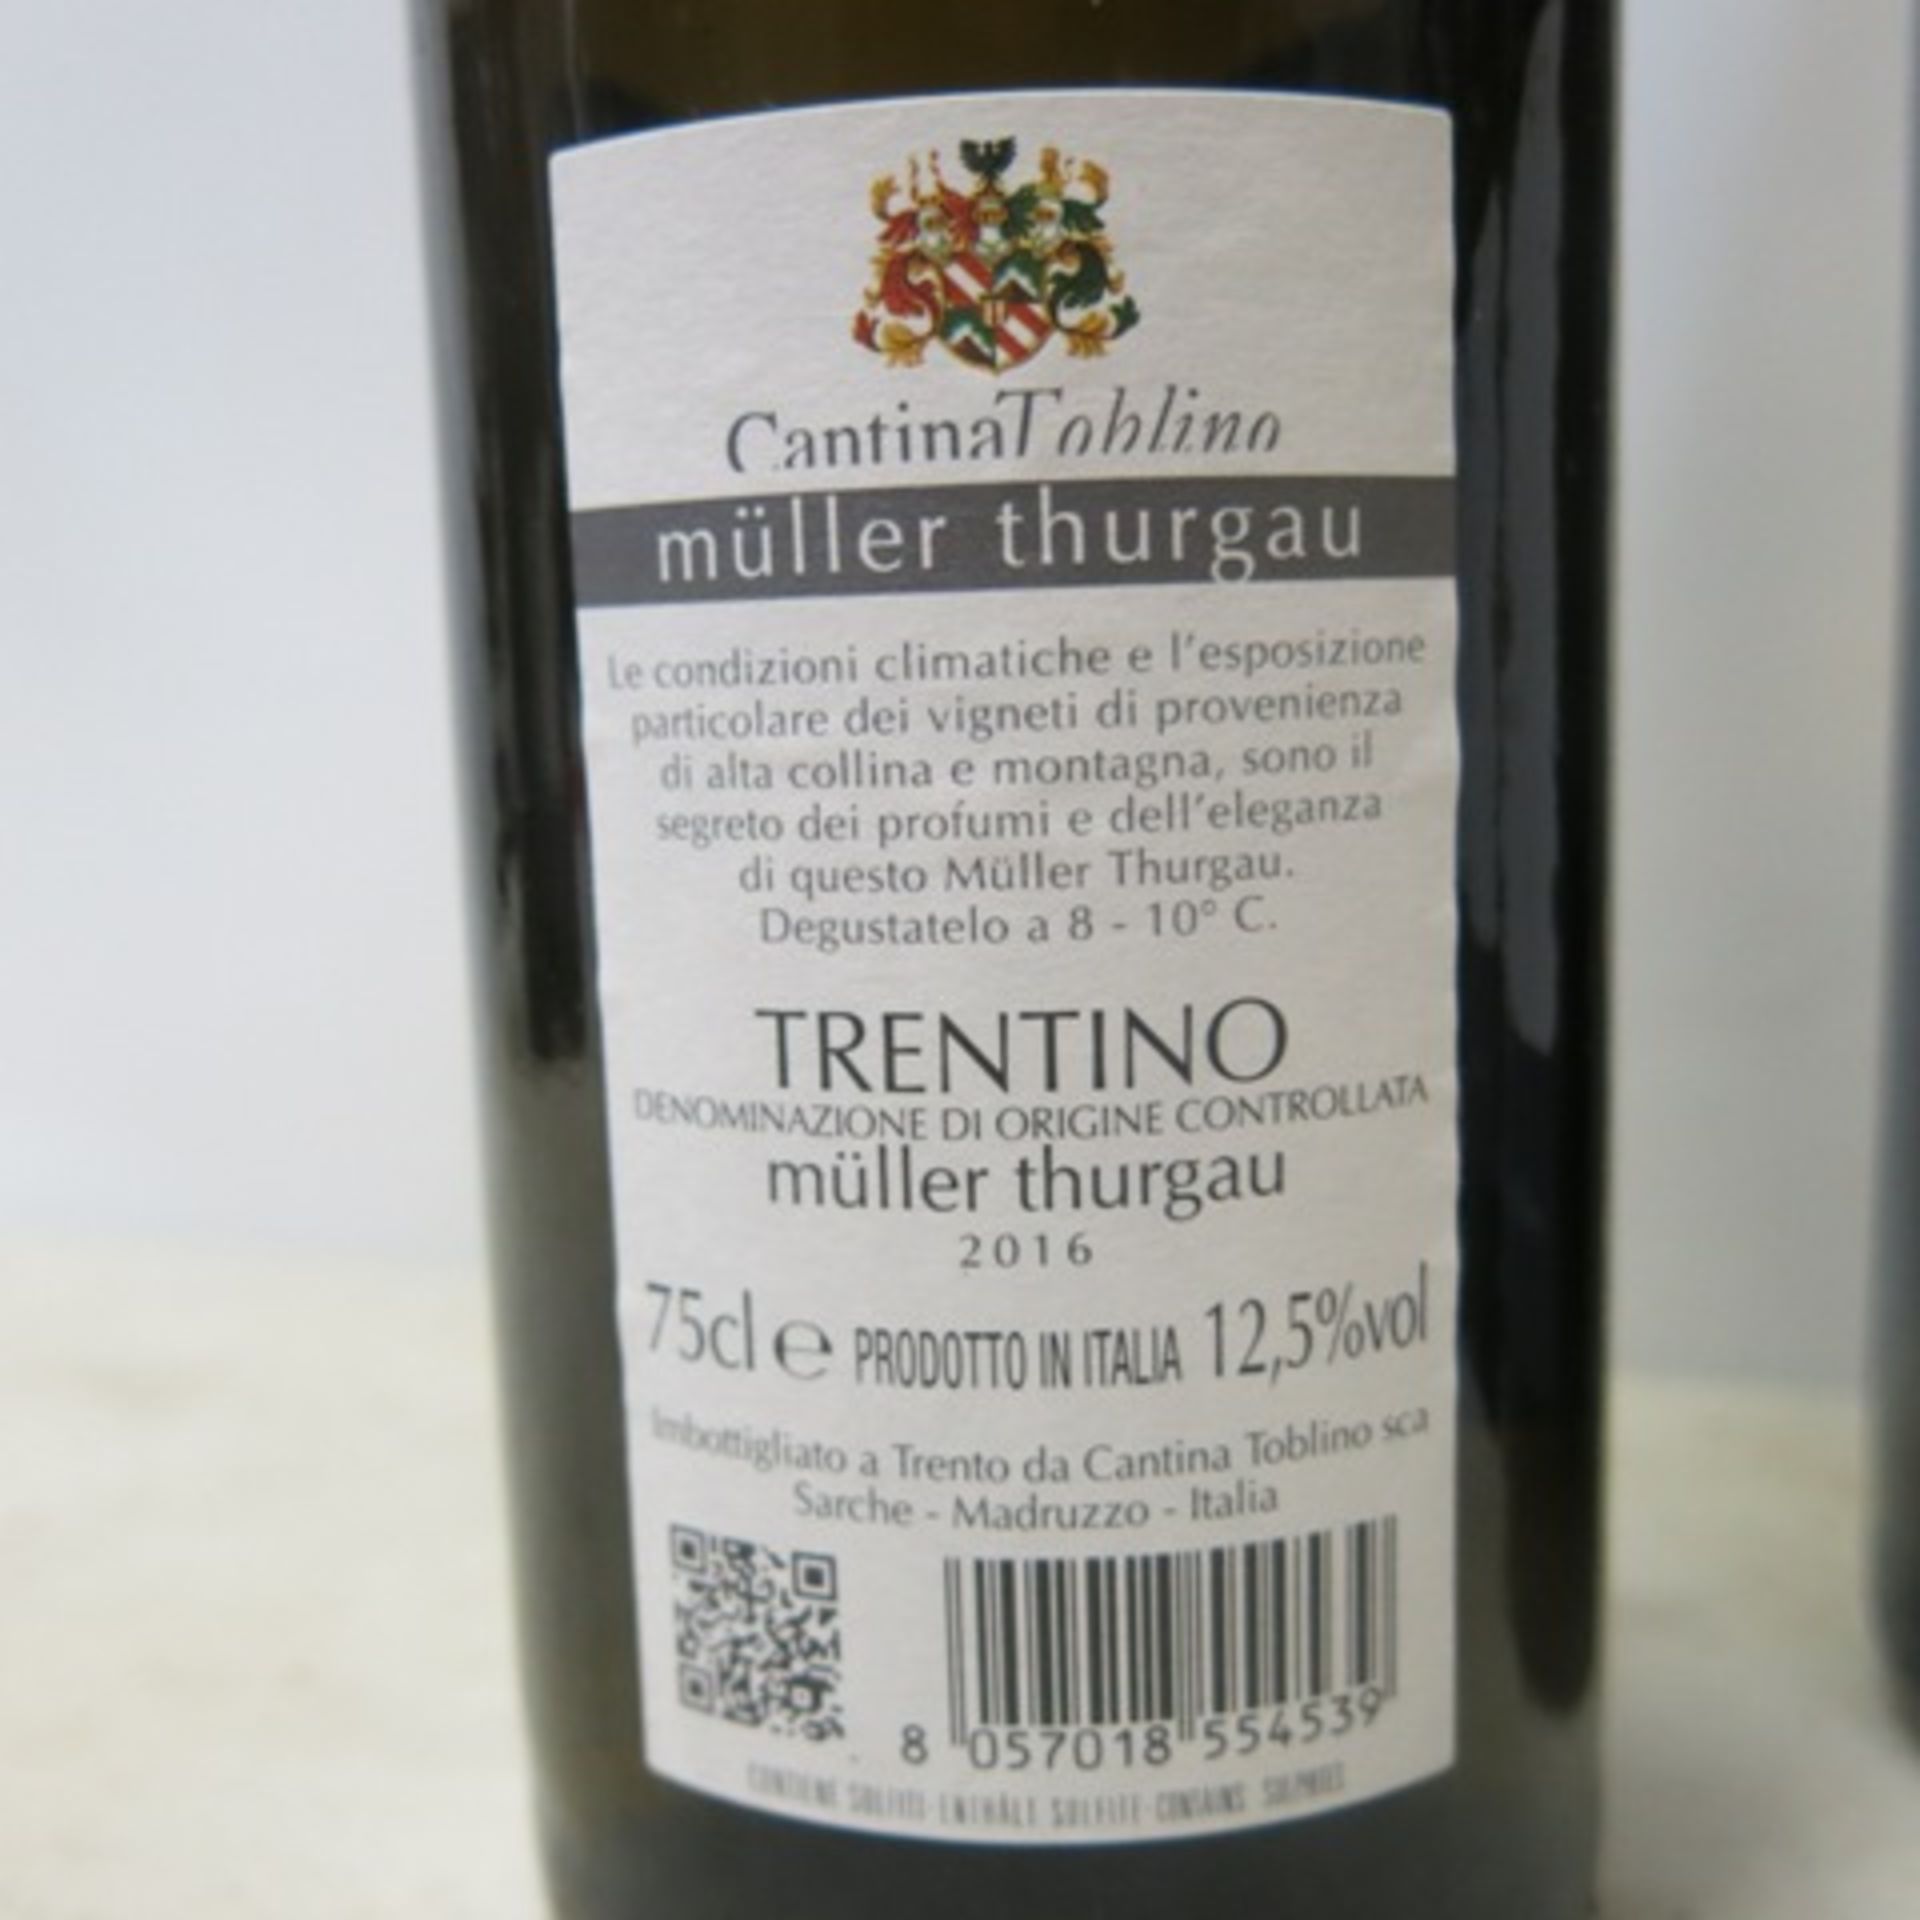 6 x Bottles of Cantina Toblino Muller Thurgau White Wine, Year 2016. Total RRP £80.00 - Image 3 of 3